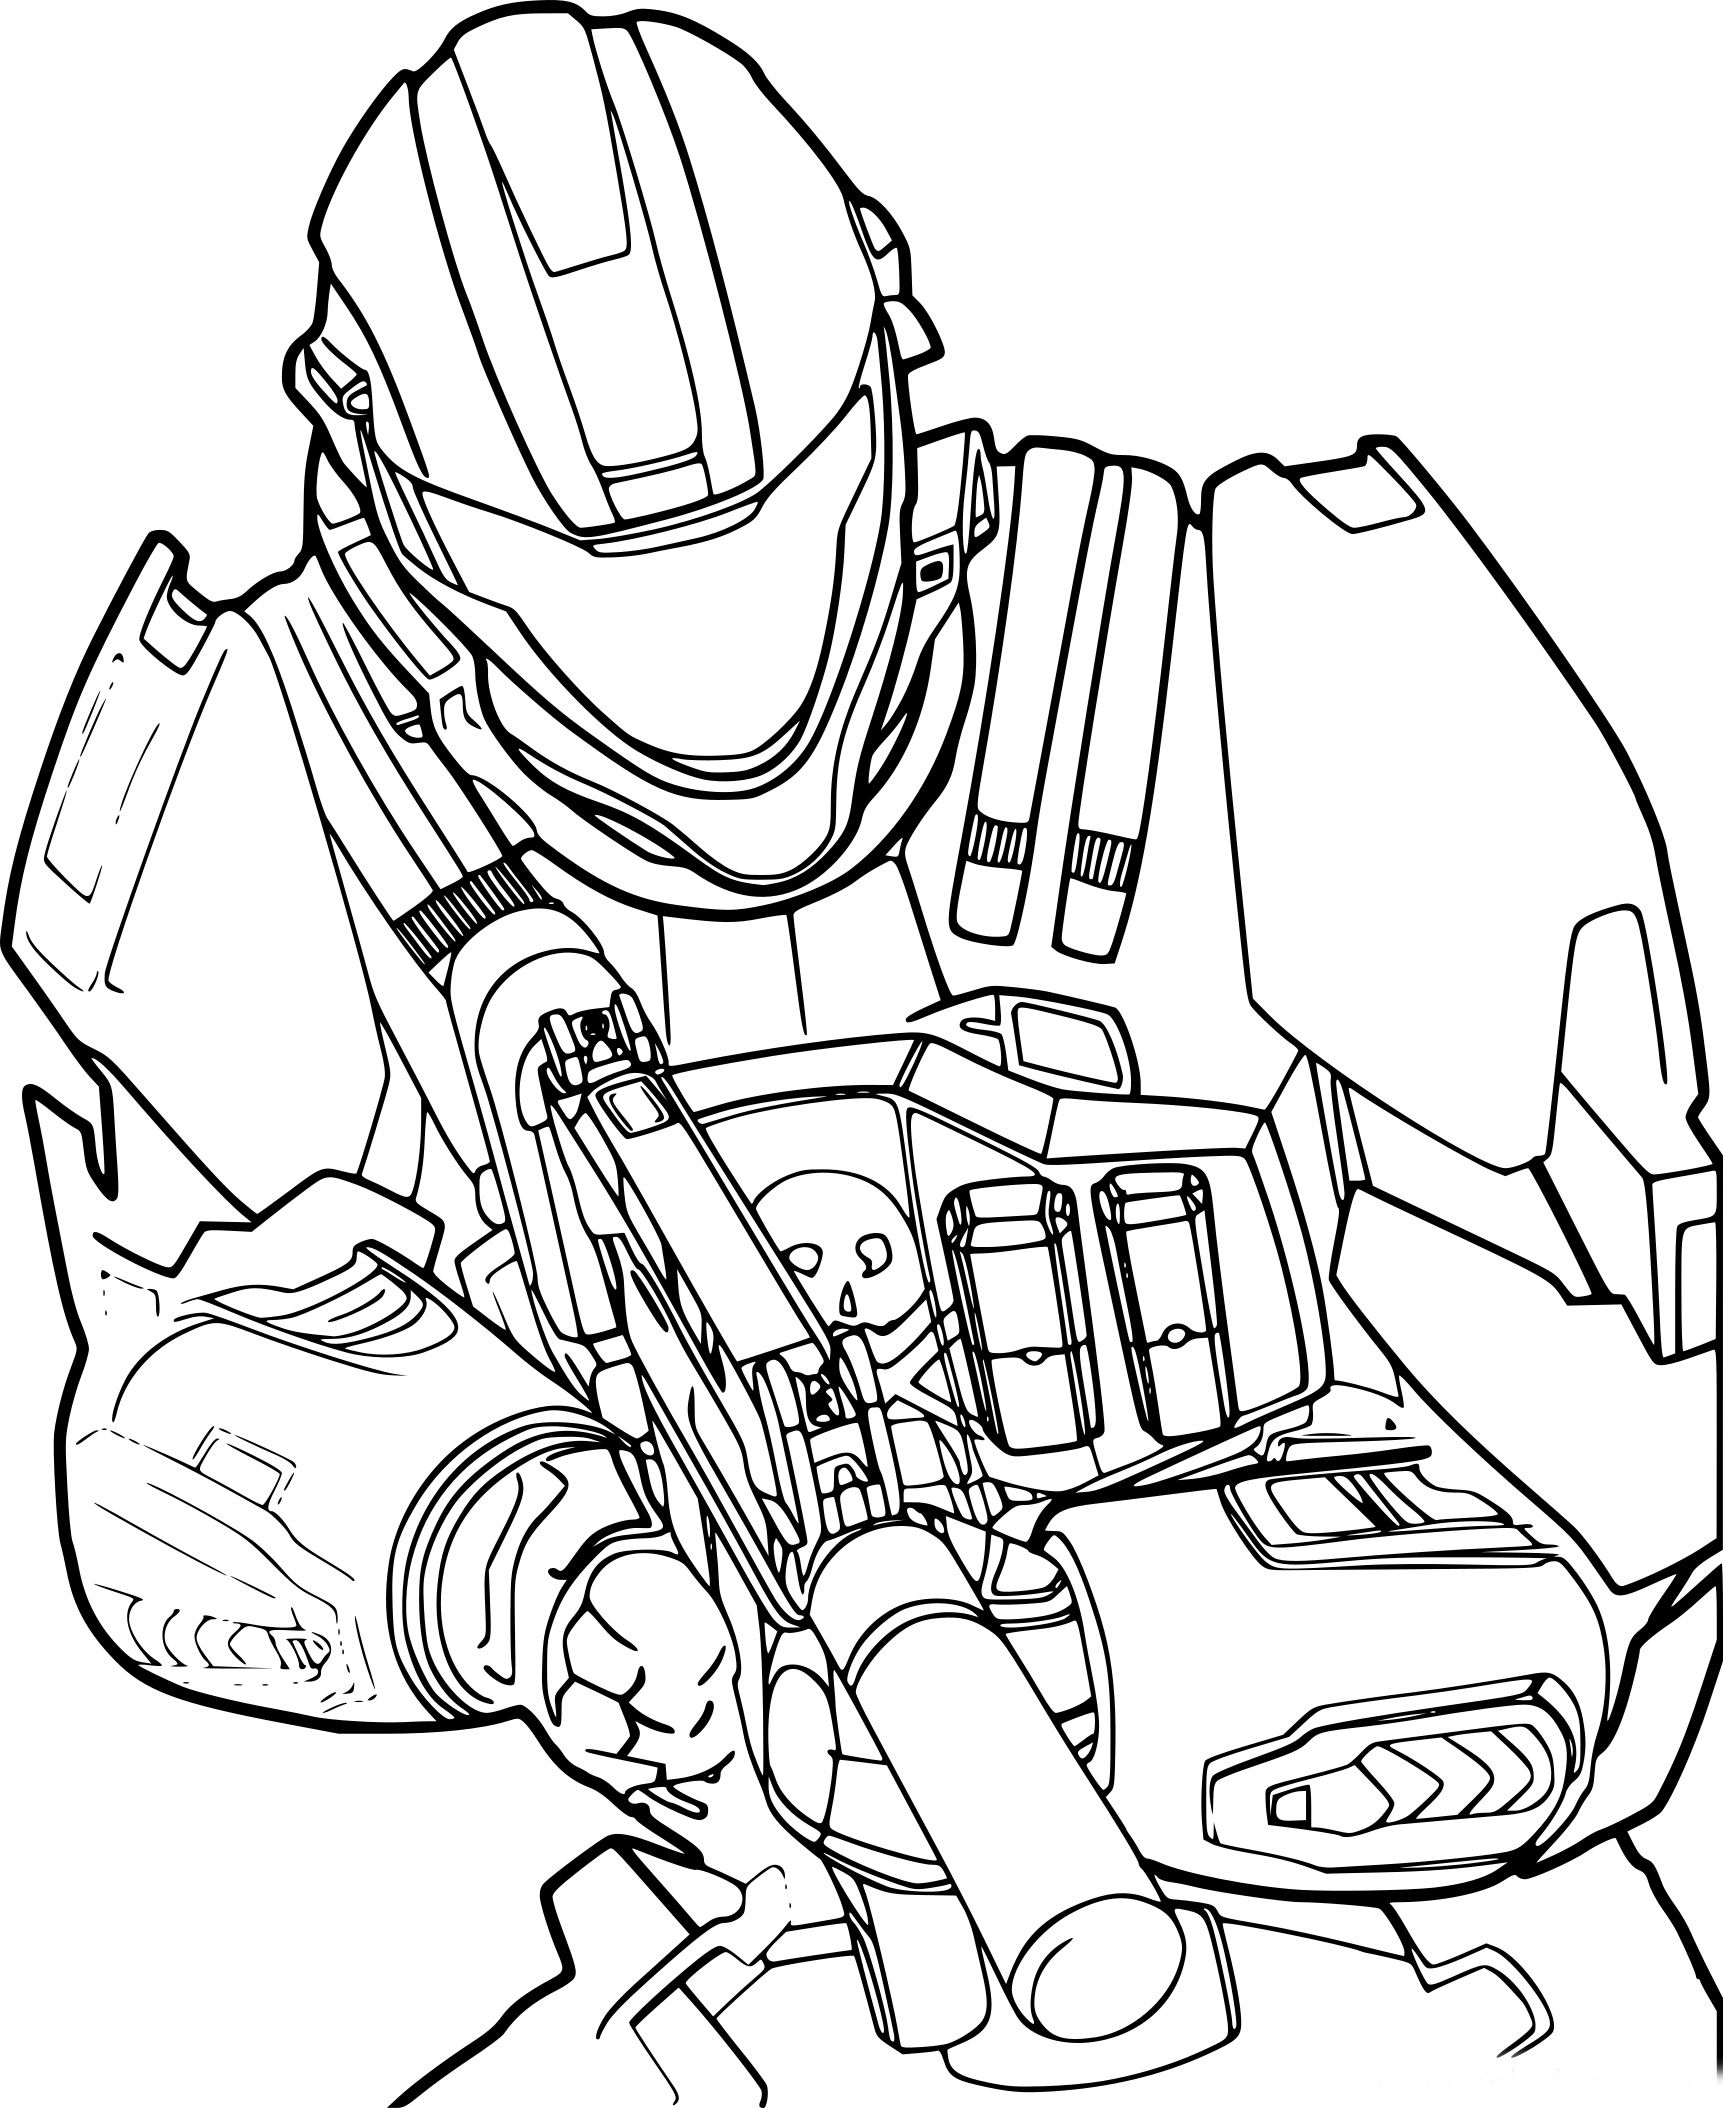 Fantastic Call Of Duty Coloring Pages Pdf - Coloringfolder encequiconcerne Dessin Call Of Duty Facile